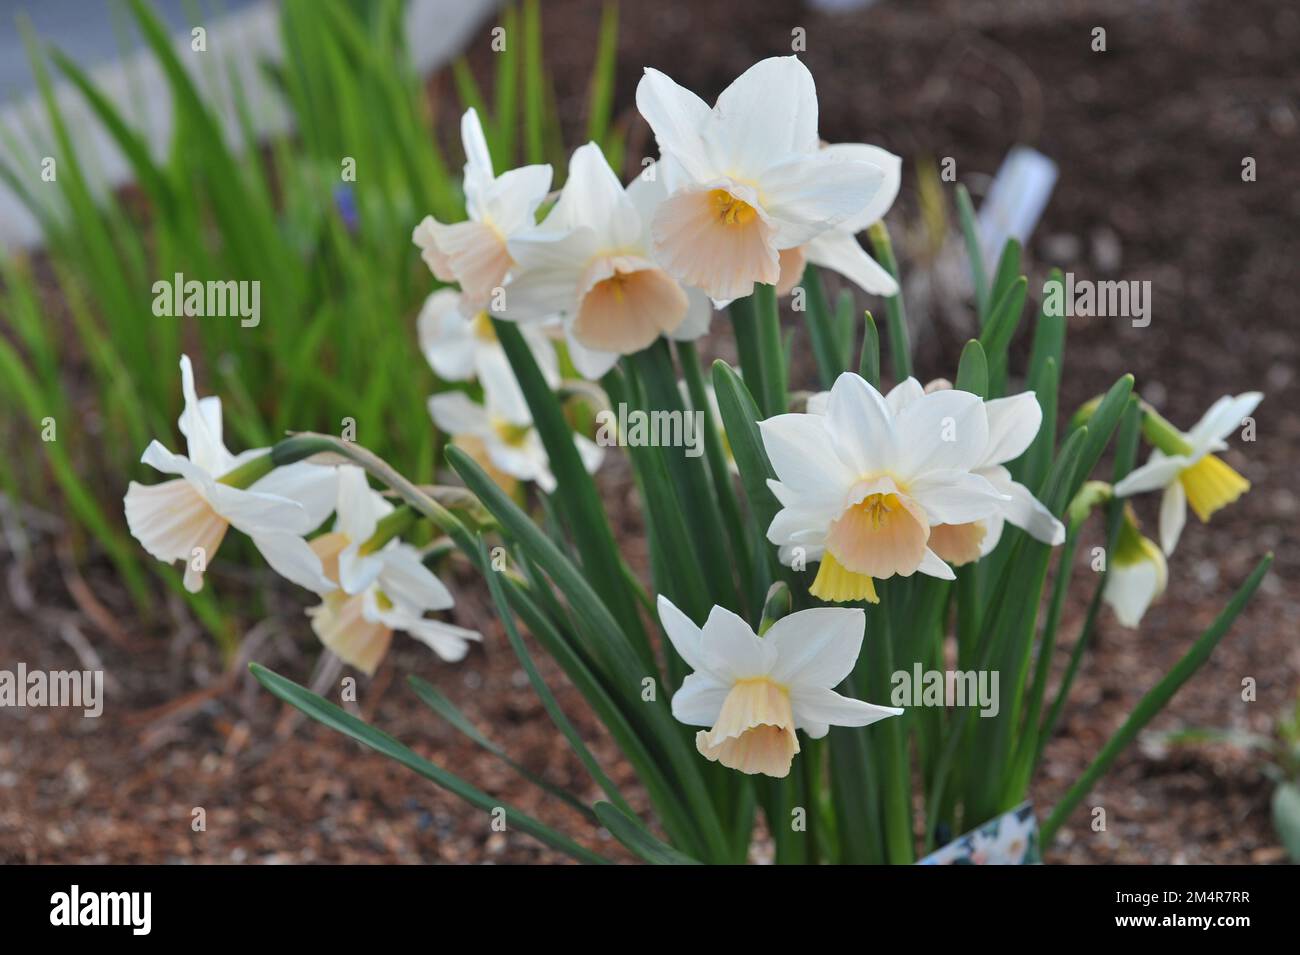 White and pink Triandrus daffodils (Narcissus) Katie Heath bloom in a garden in May Stock Photo